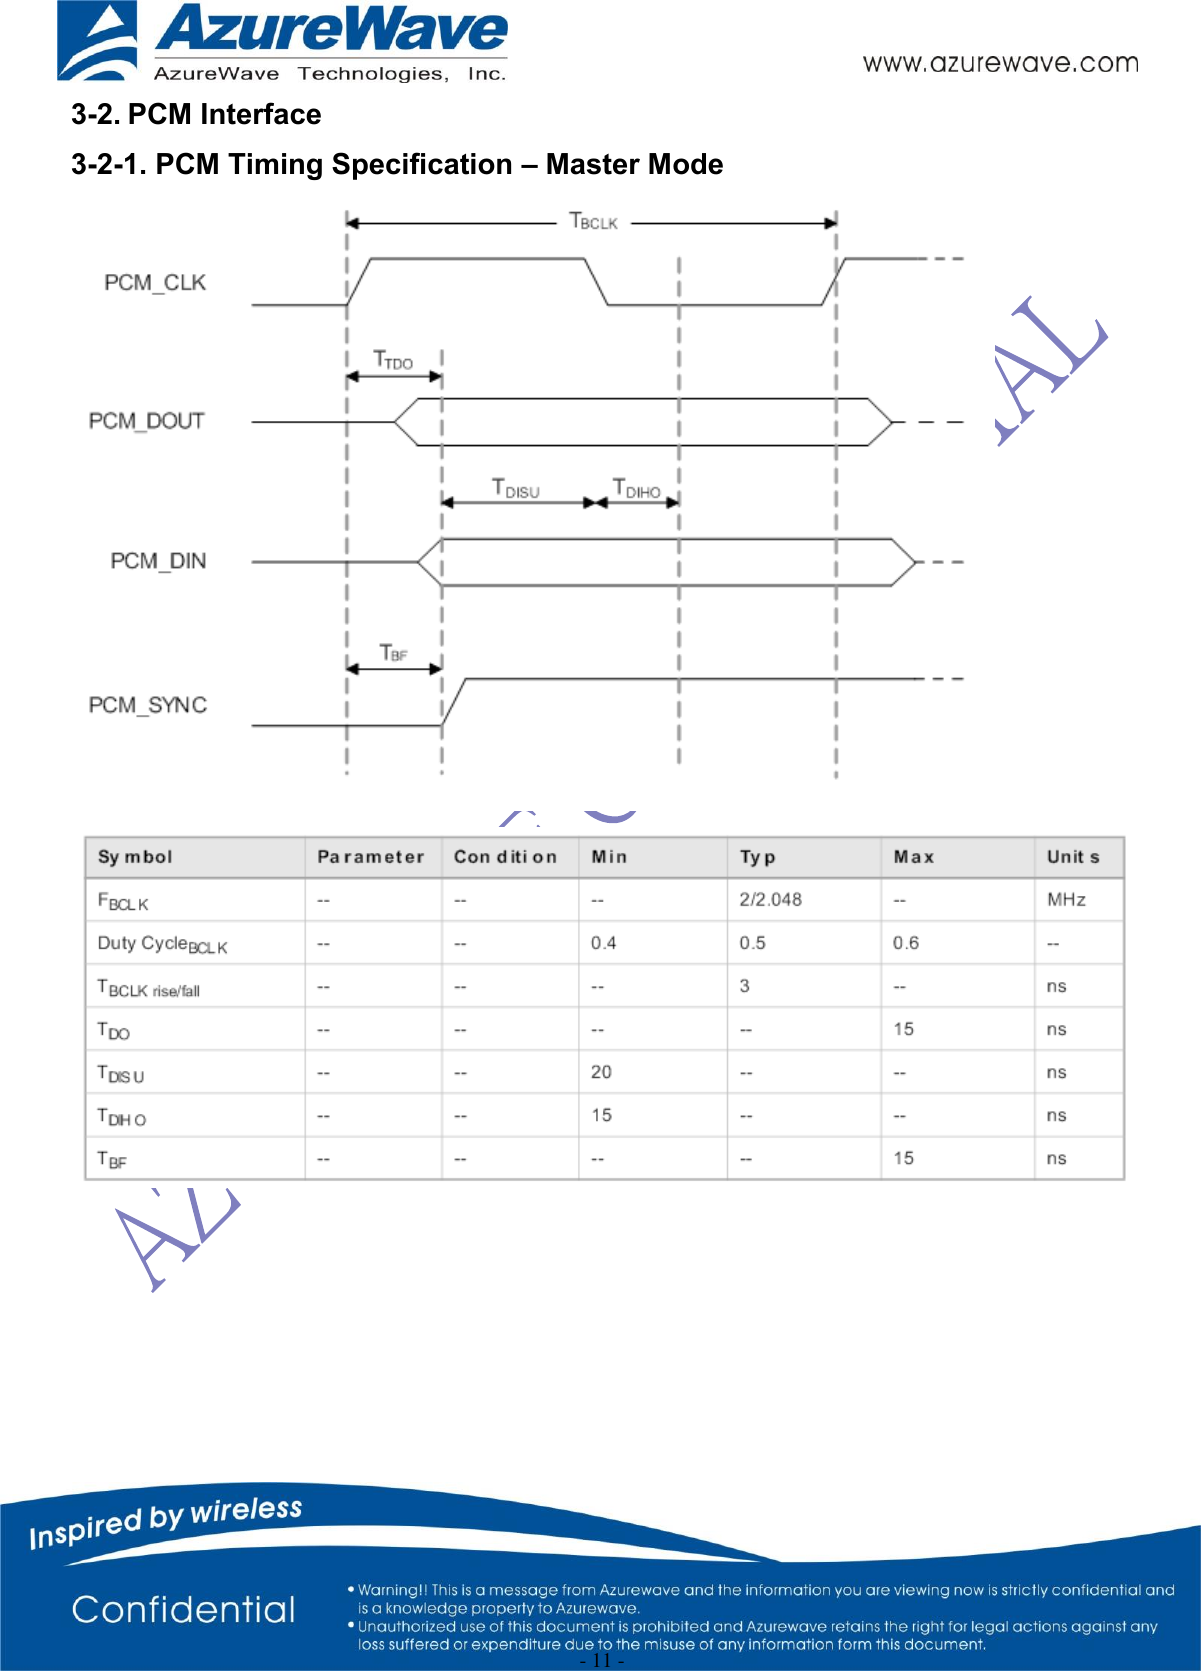  - 11 - 3-2. PCM Interface 3-2-1. PCM Timing Specification – Master Mode             